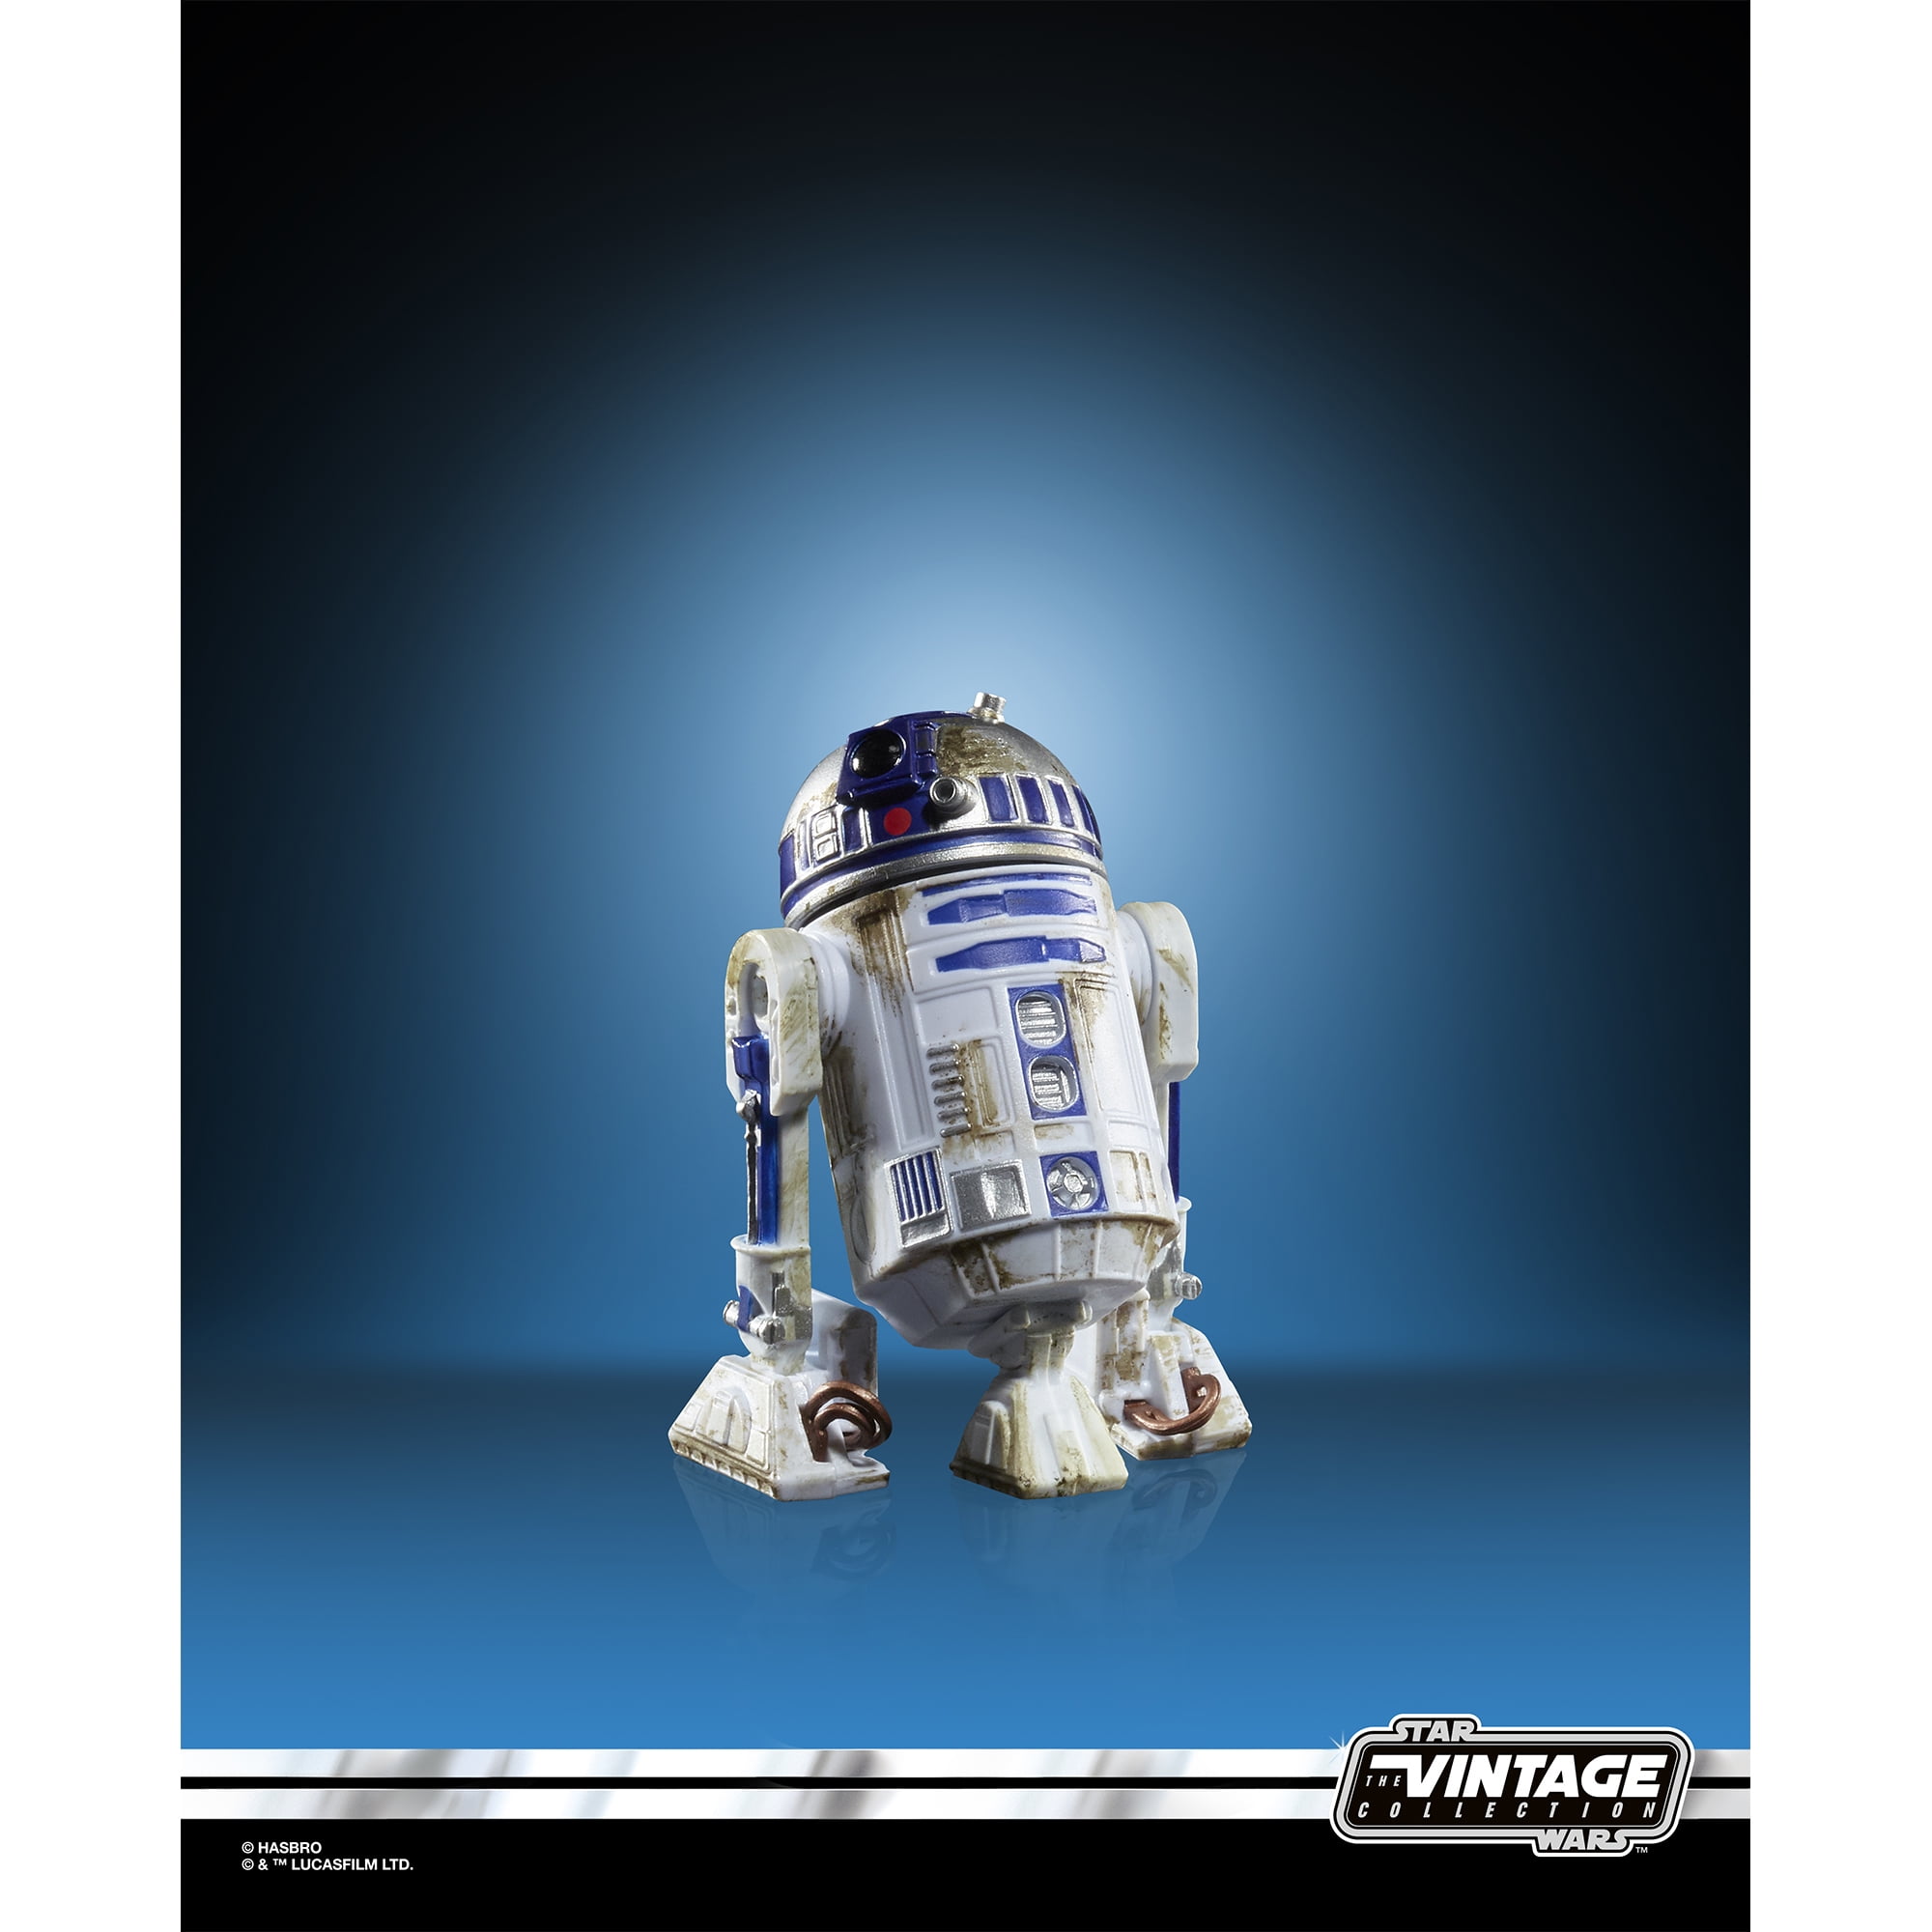 Star Wars Hasbro Disney Walmart R2-d2 Collectible Action Figure Toy for sale online 